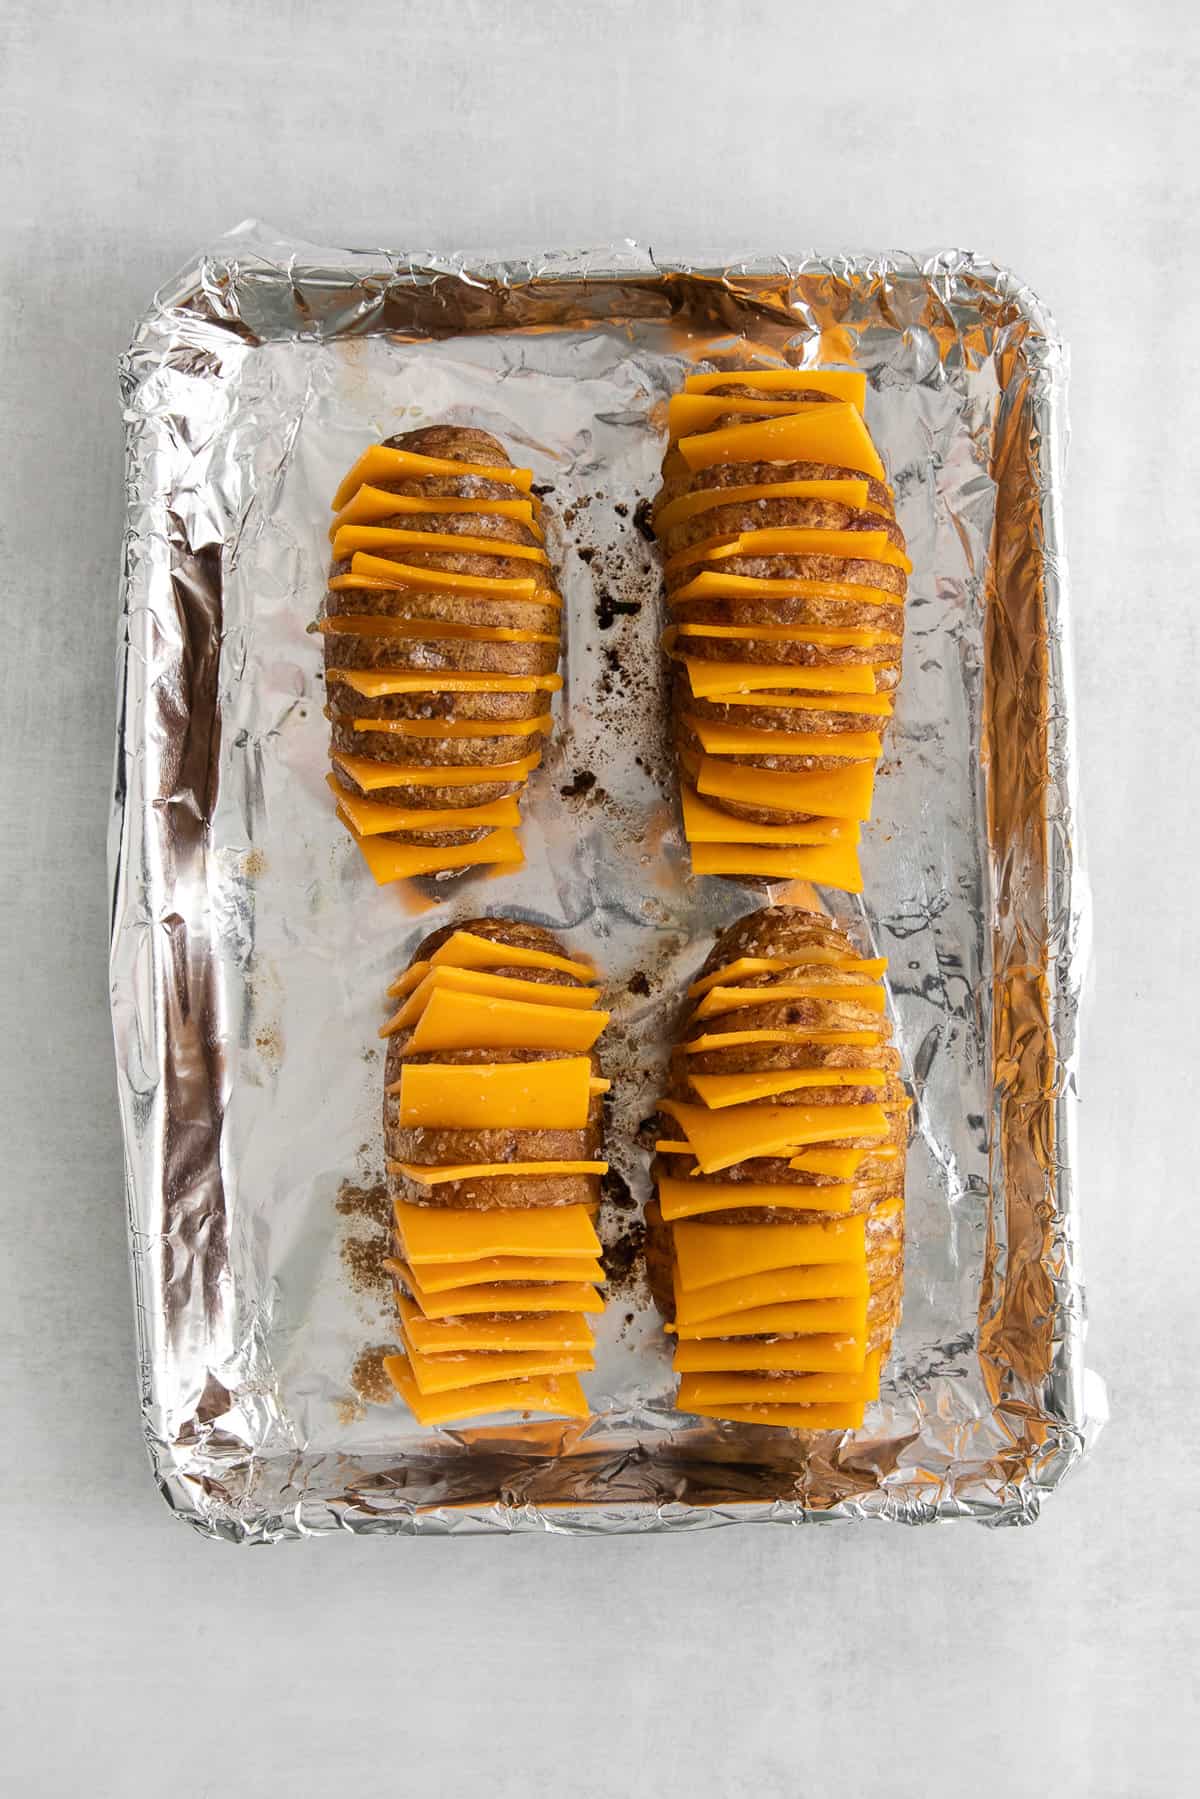 Hasselback potatoes with cheese on a baking sheet.